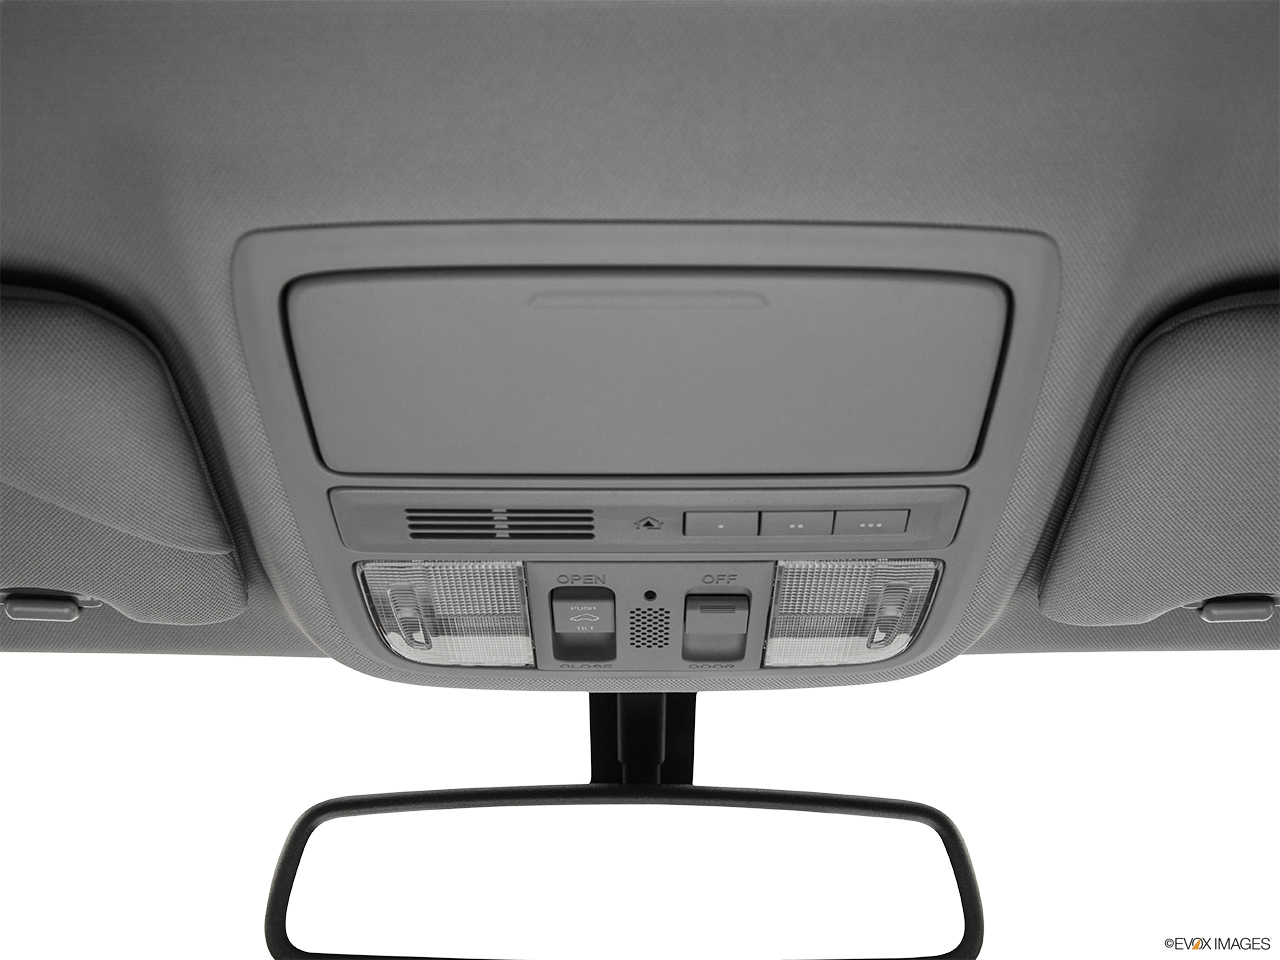 2014 Acura TSX 5-Speed Automatic Courtesy lamps/ceiling controls. 